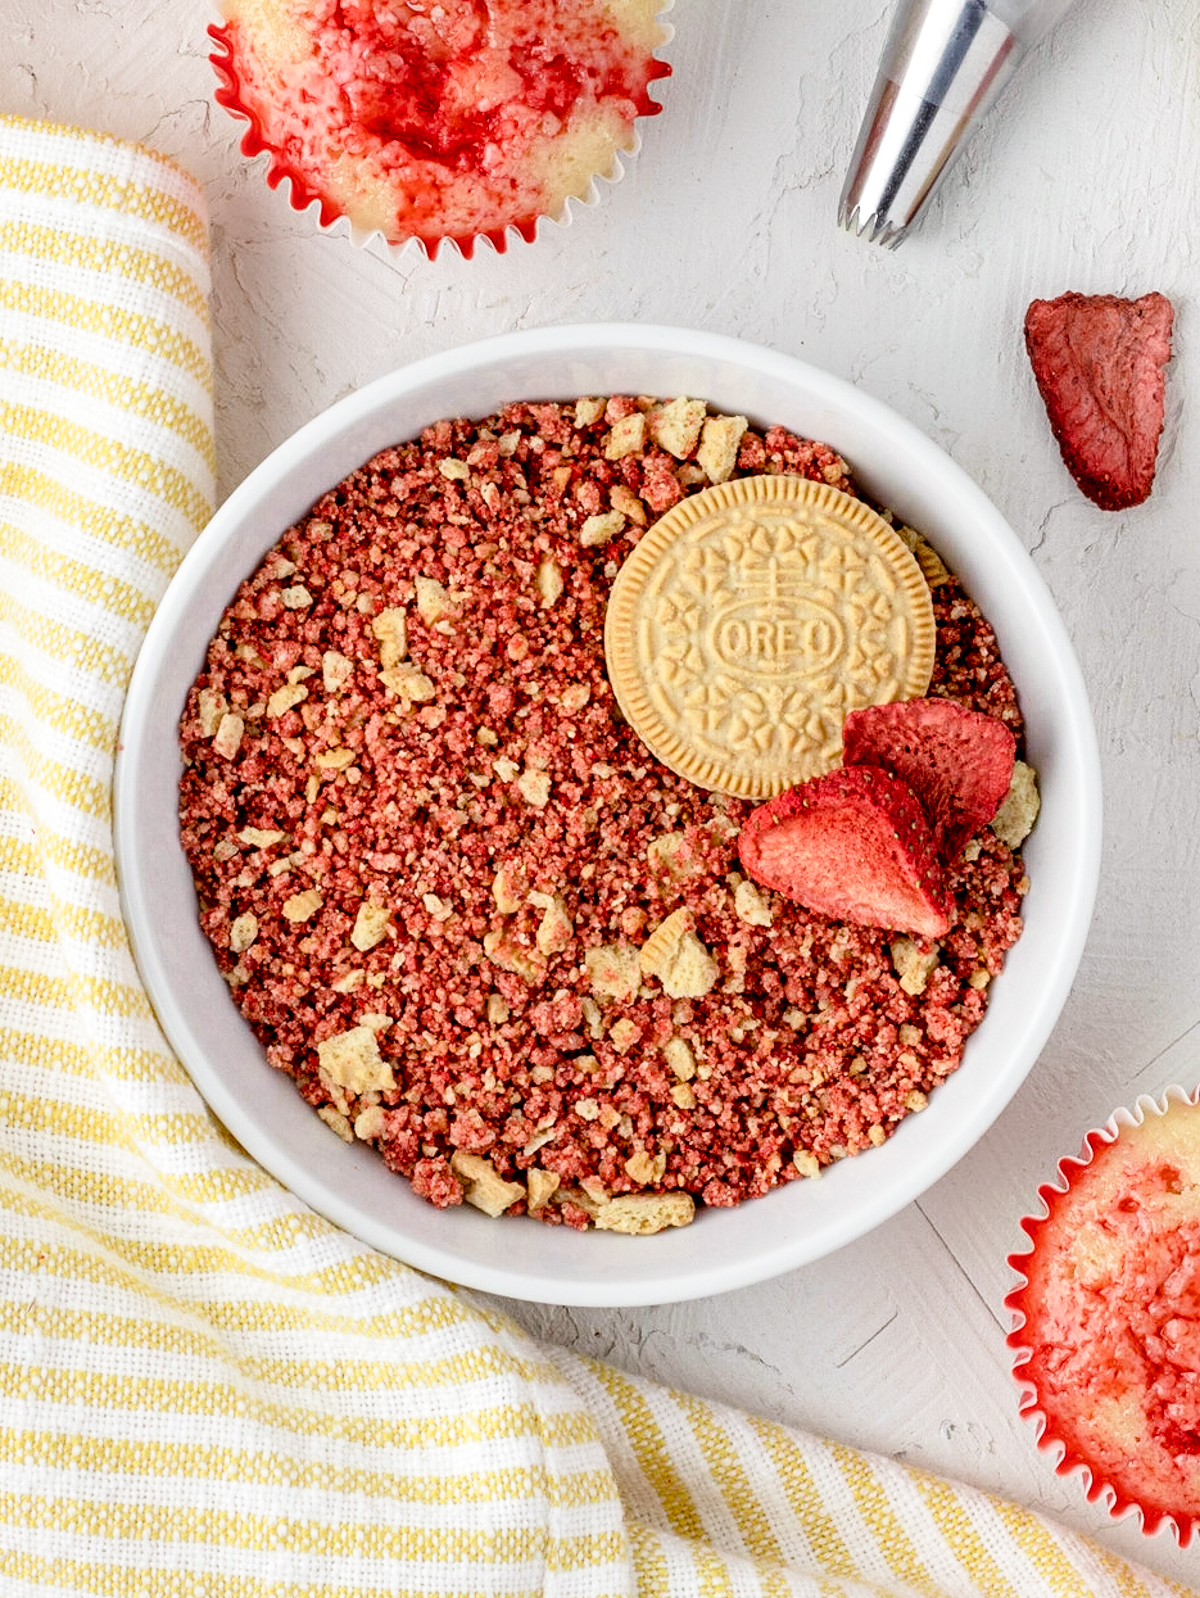 Bowl of strawberry crunch crumbles ready to sprinkle on desserts.